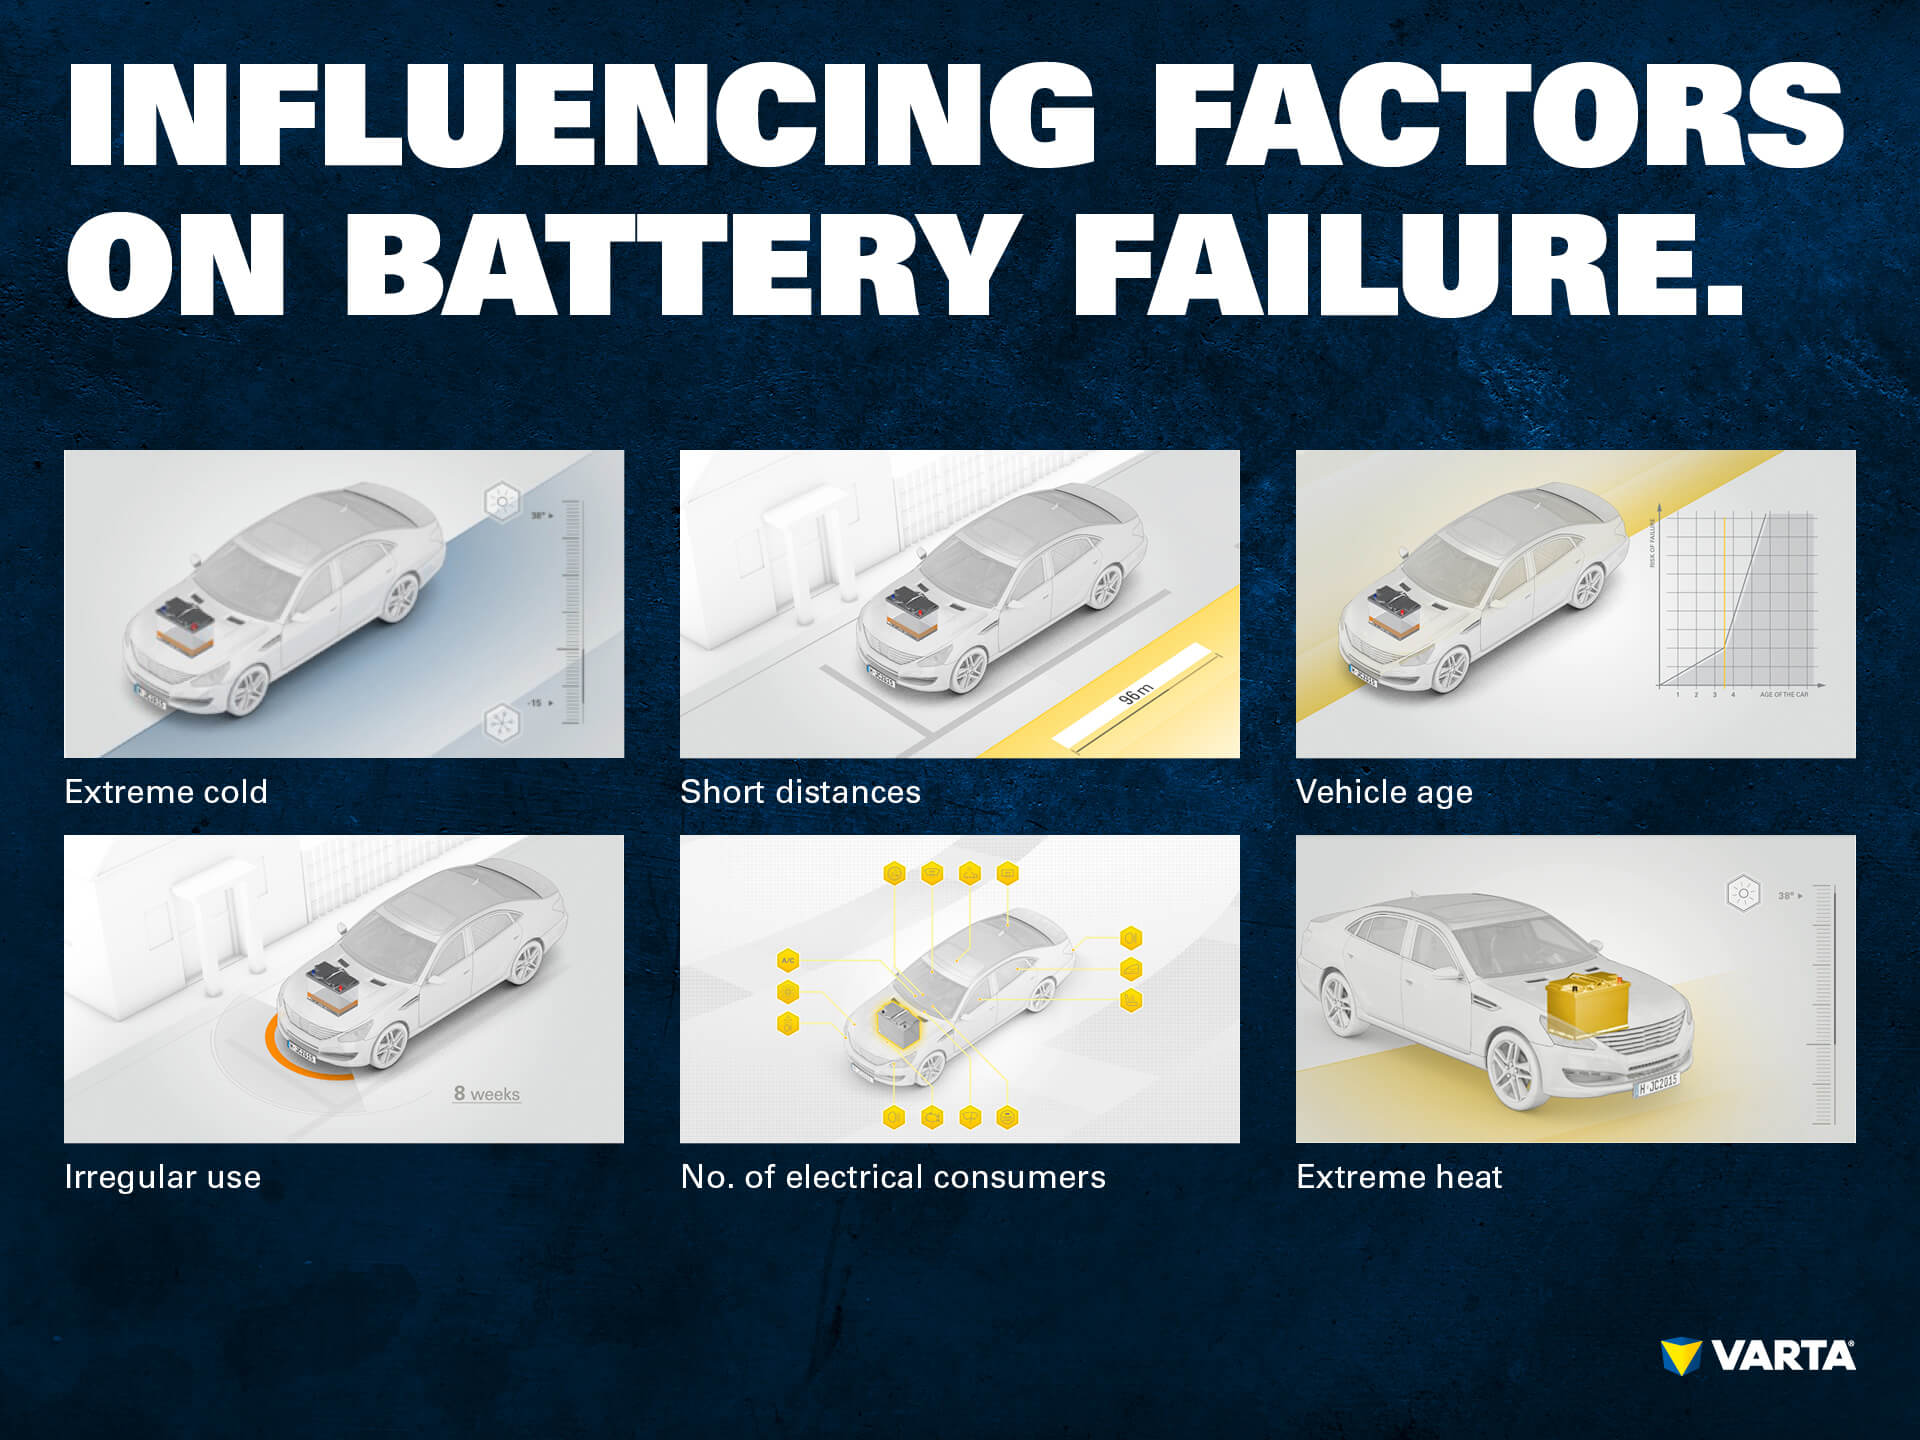 Influencing factors on battery failure